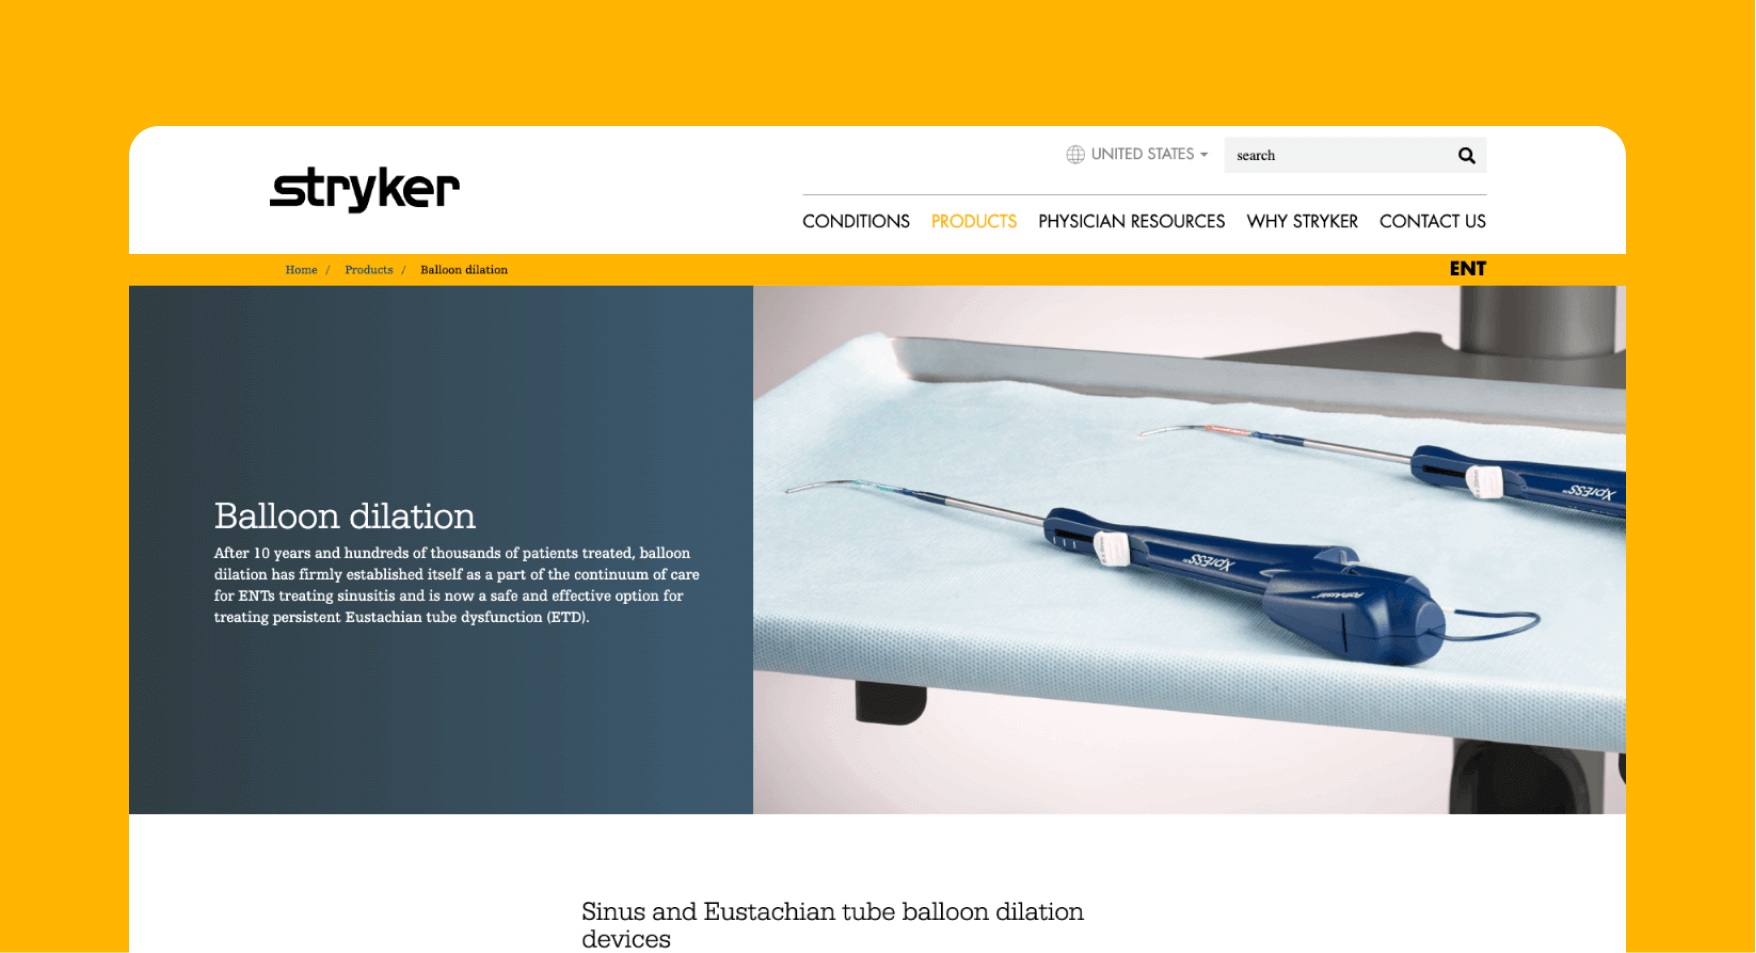 Stryker product detail page